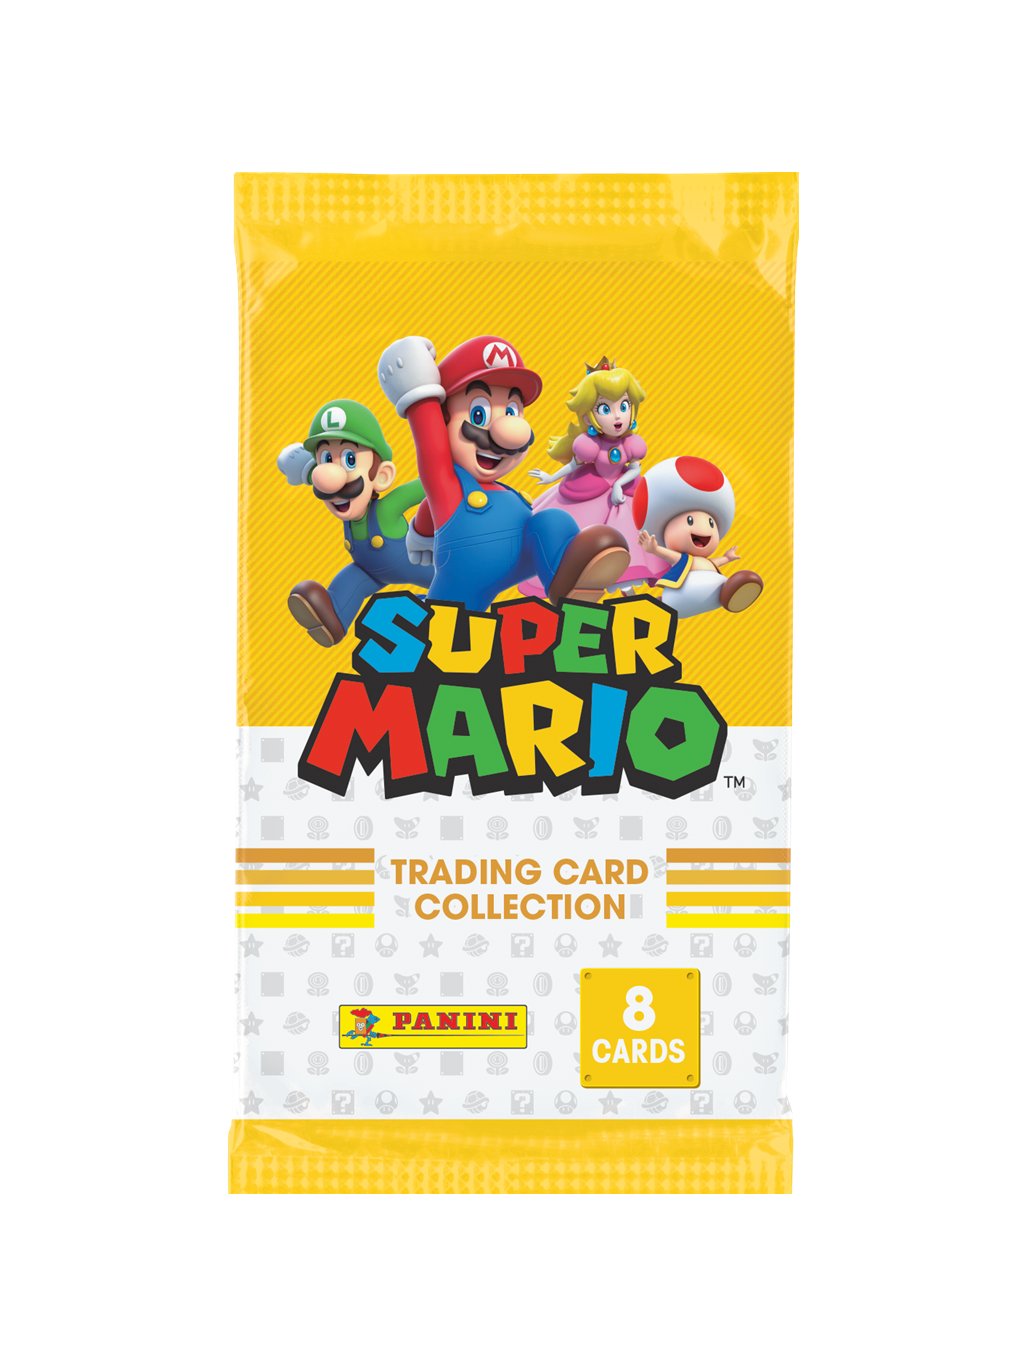 super mario trading card boosterpack